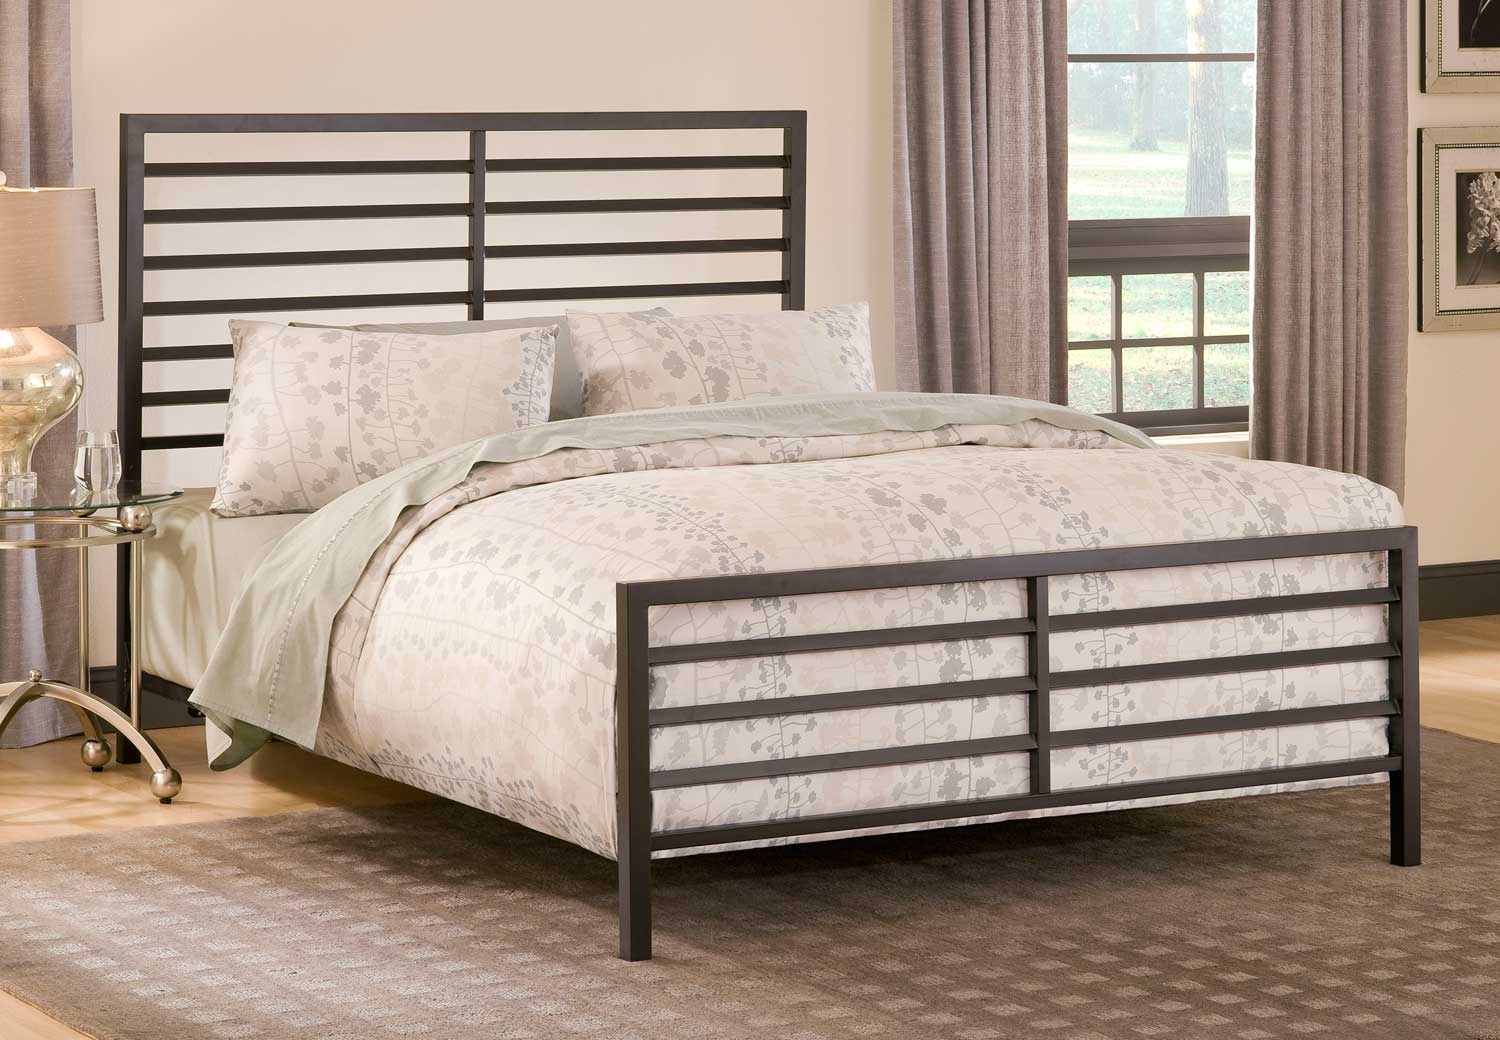 Hillsdale Latimore Bed - Charcoal Black